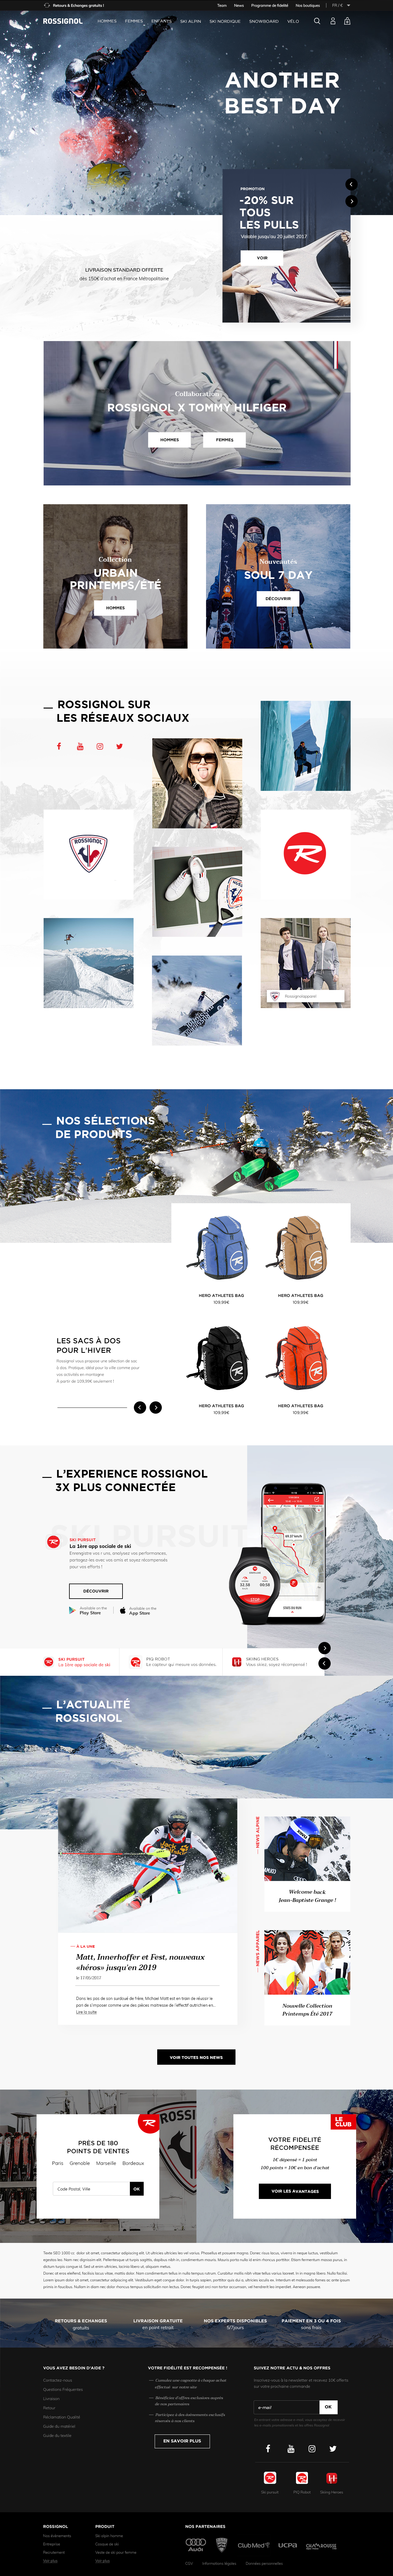 01-1_D_HomePage_stage_Sport